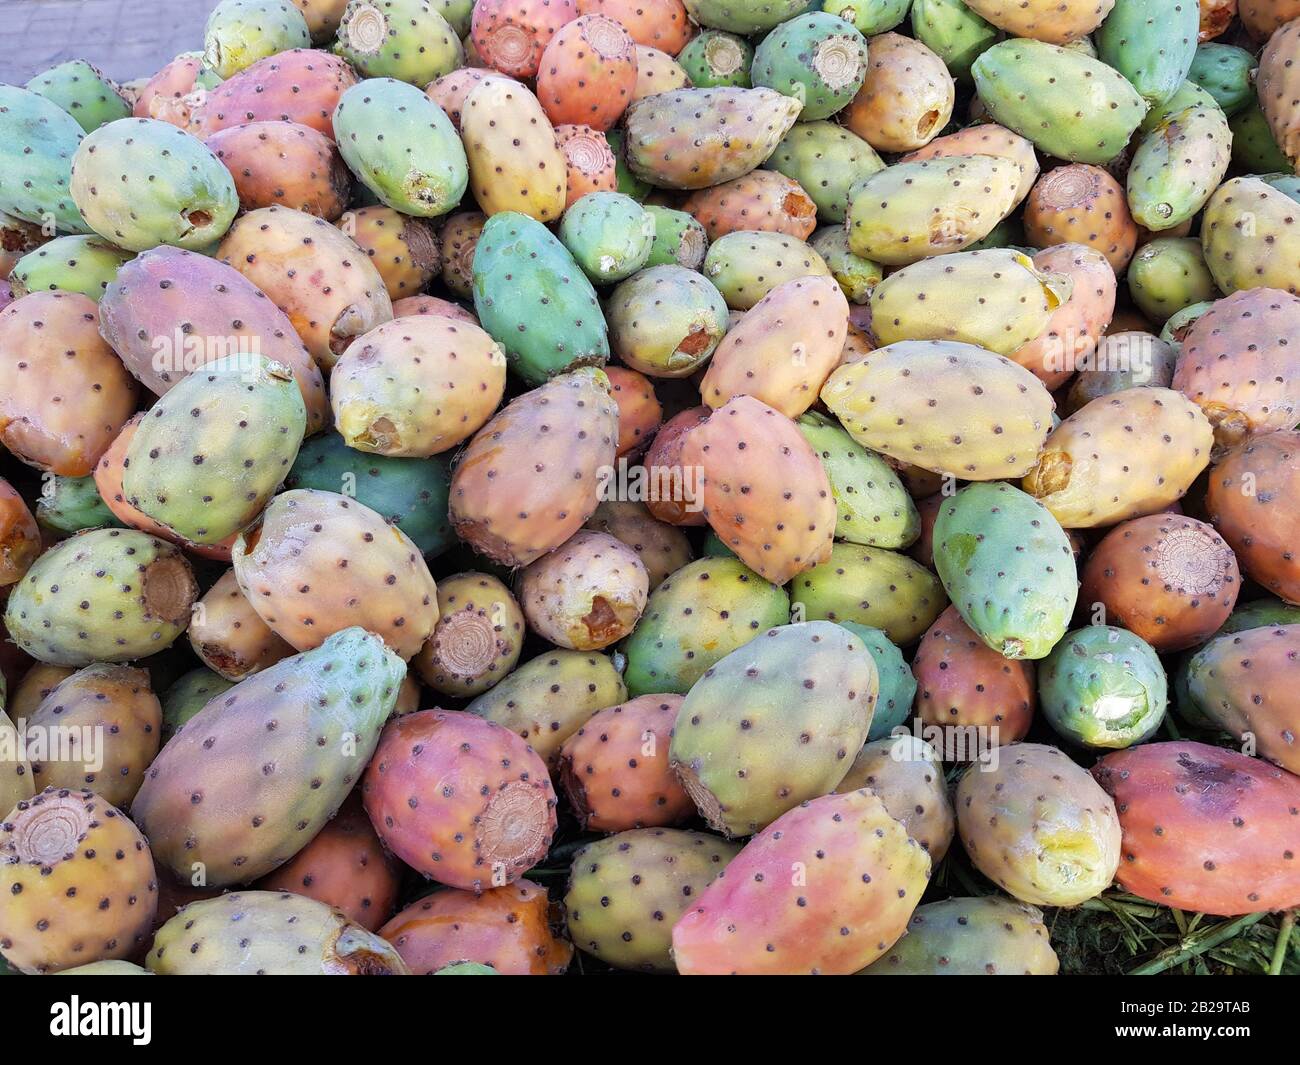 Many multicilored opuntia cactus (prickly pear) fruits. Stock Photo